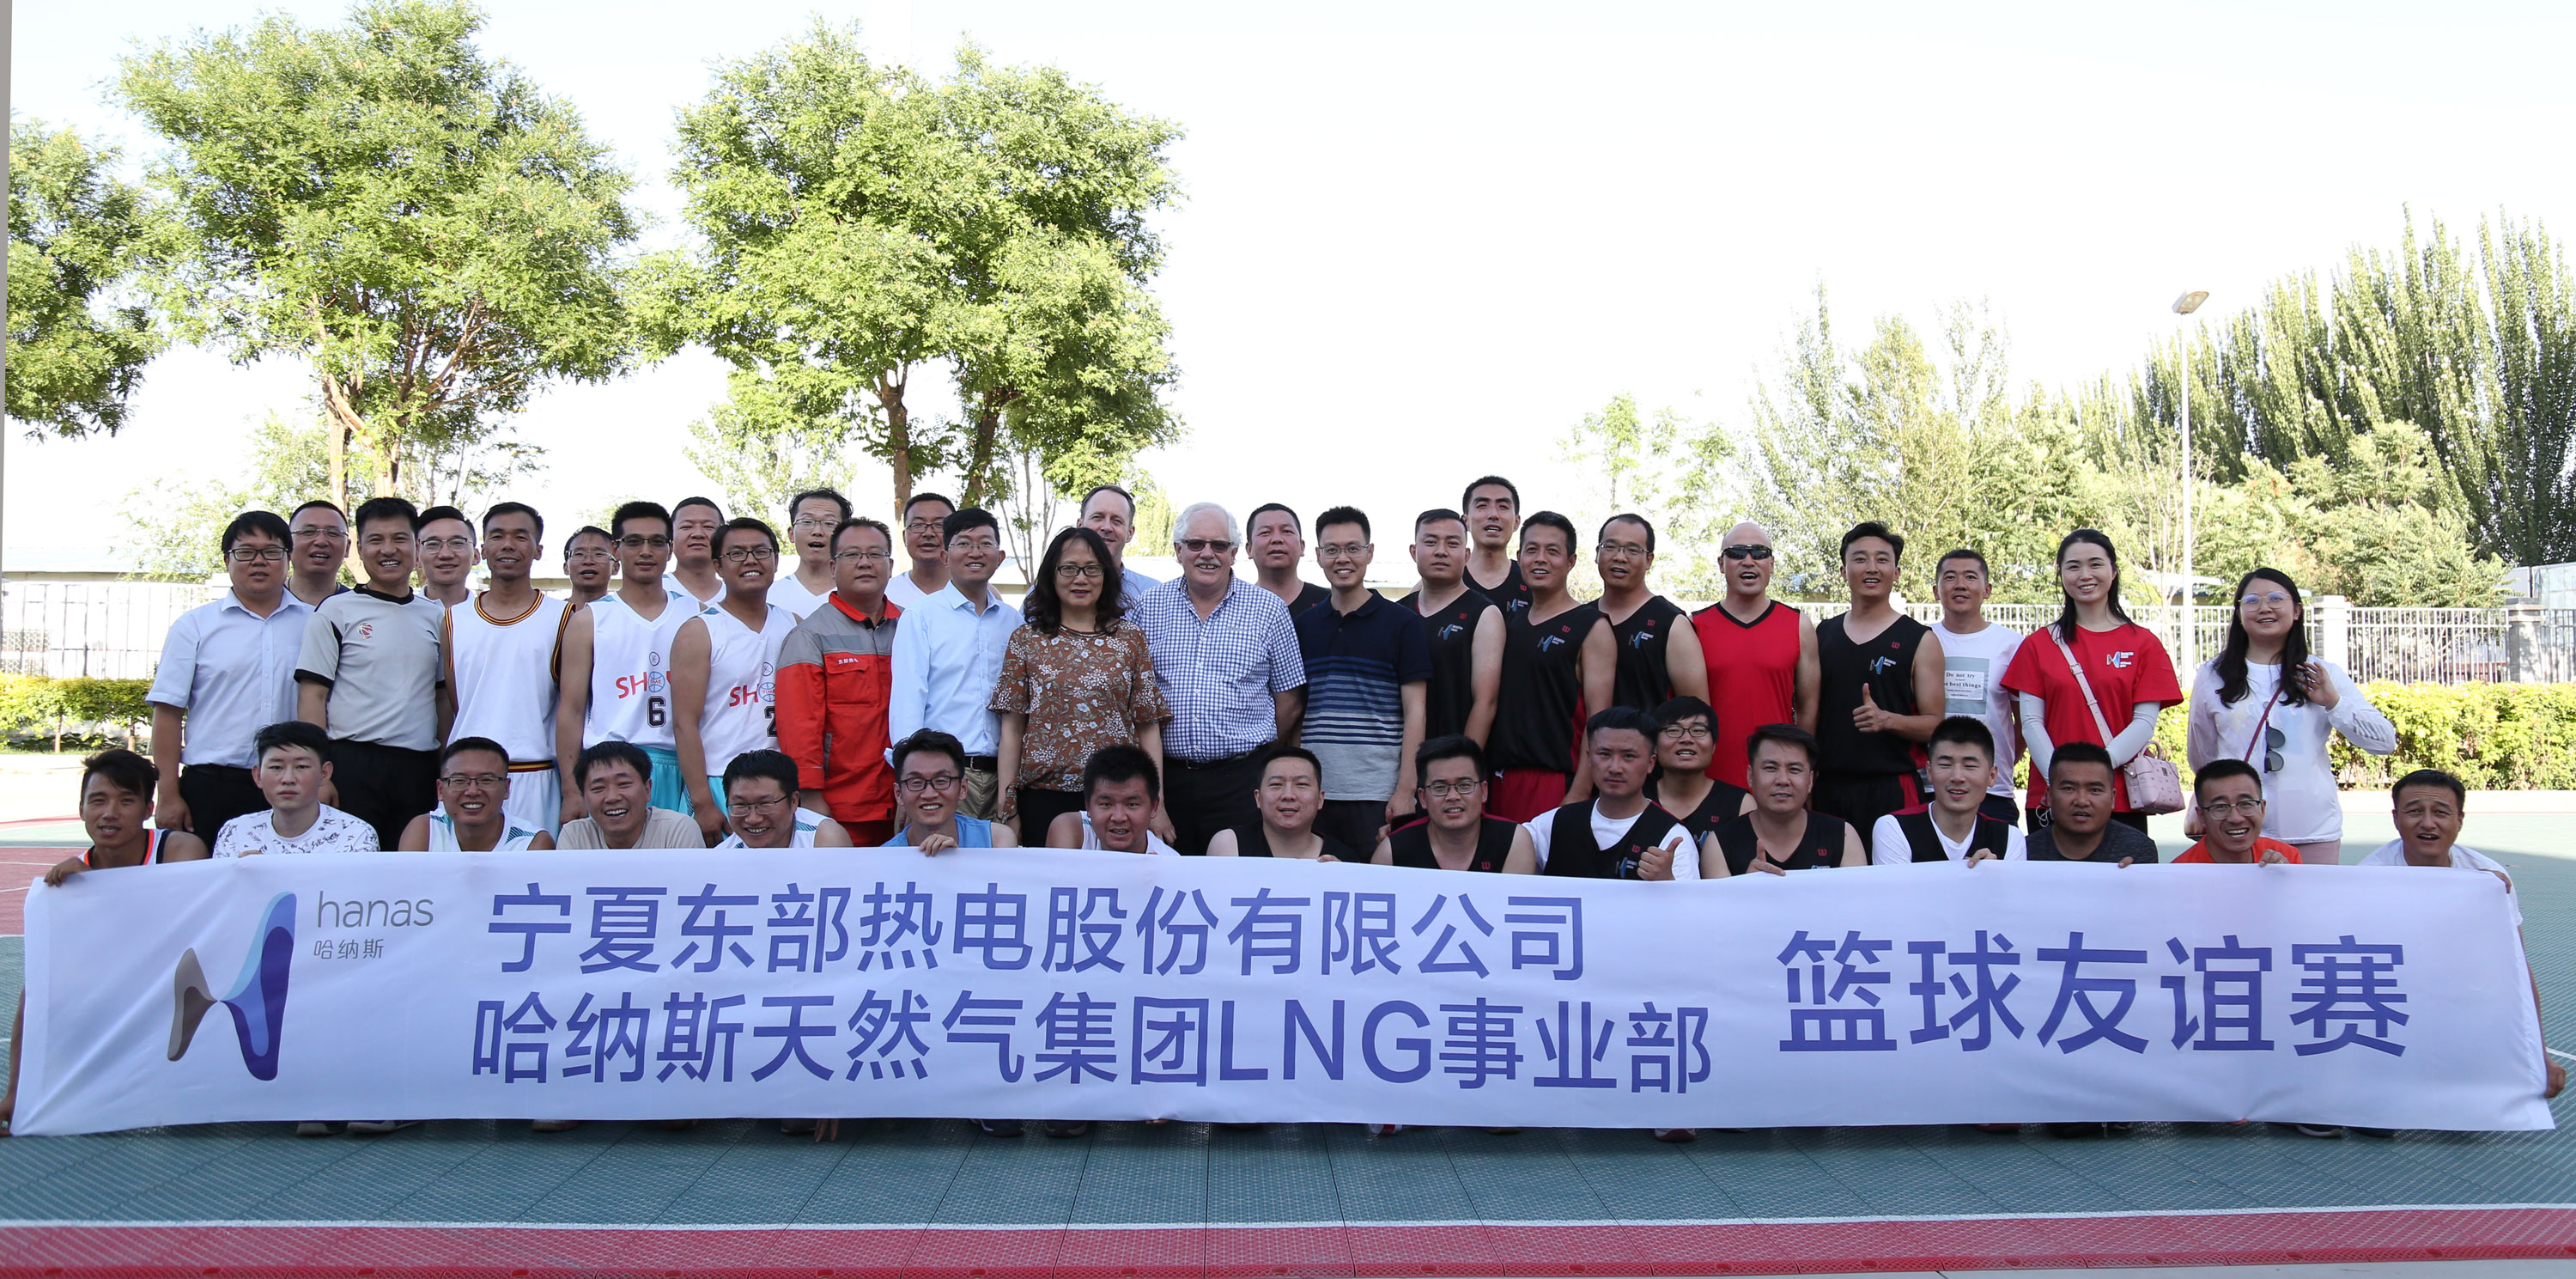 Hanas natural gas group LNG business department held a basketball friendly match with Ningxia Eastern Thermal Power Co., Ltd